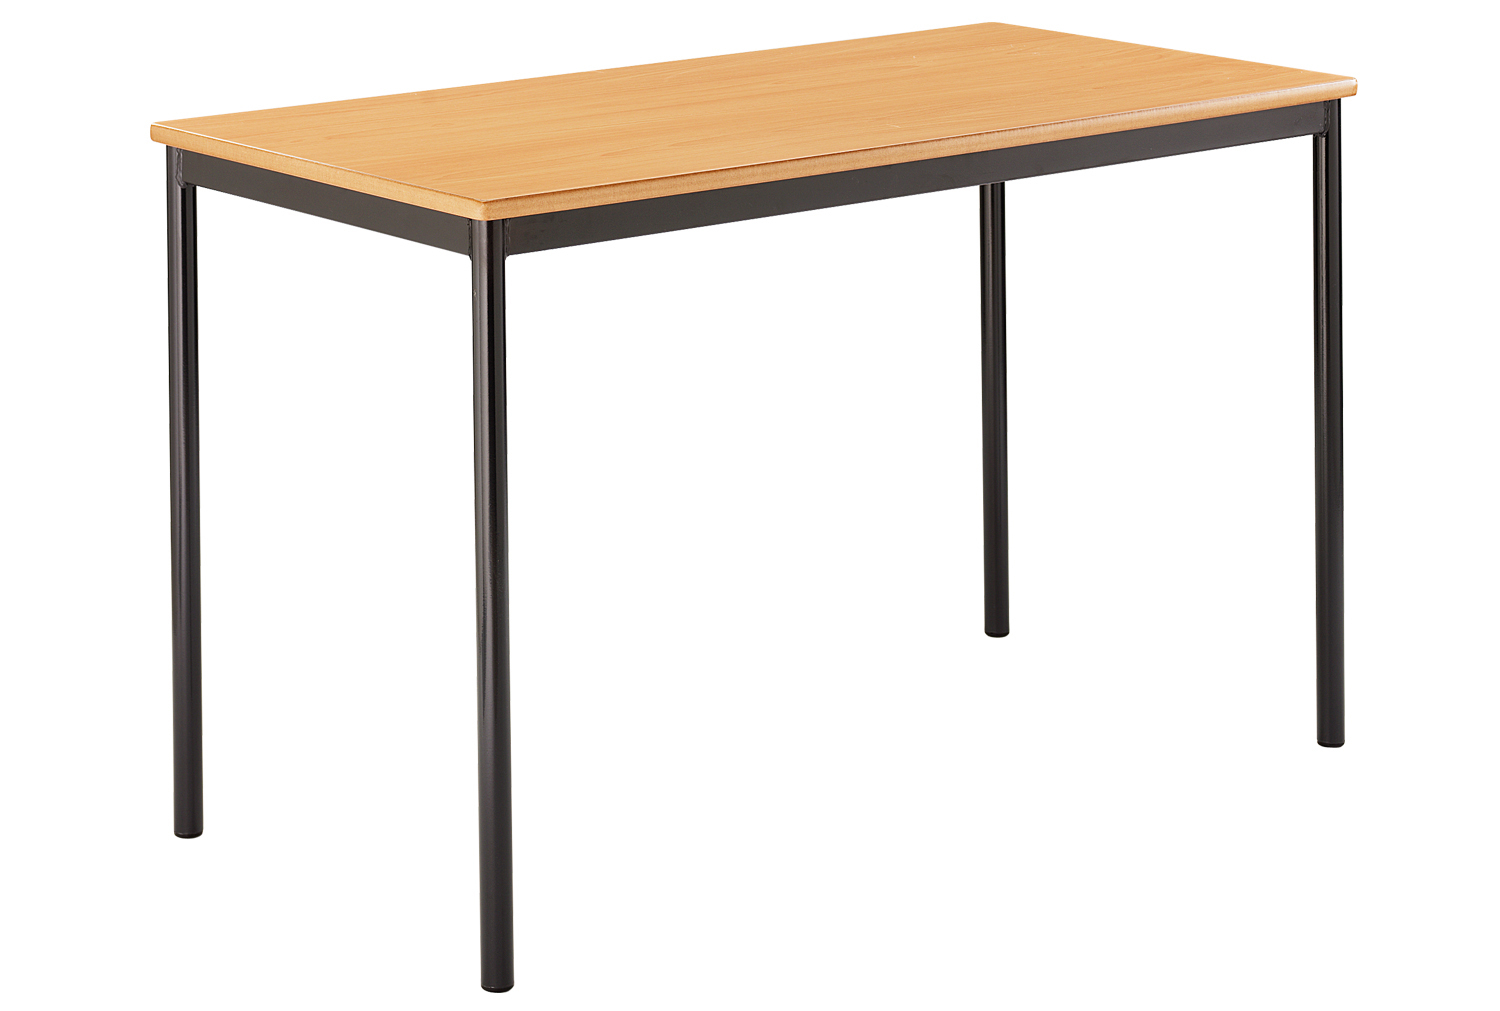 Rectangular Fully Welded Classroom Tables 6-8 Years